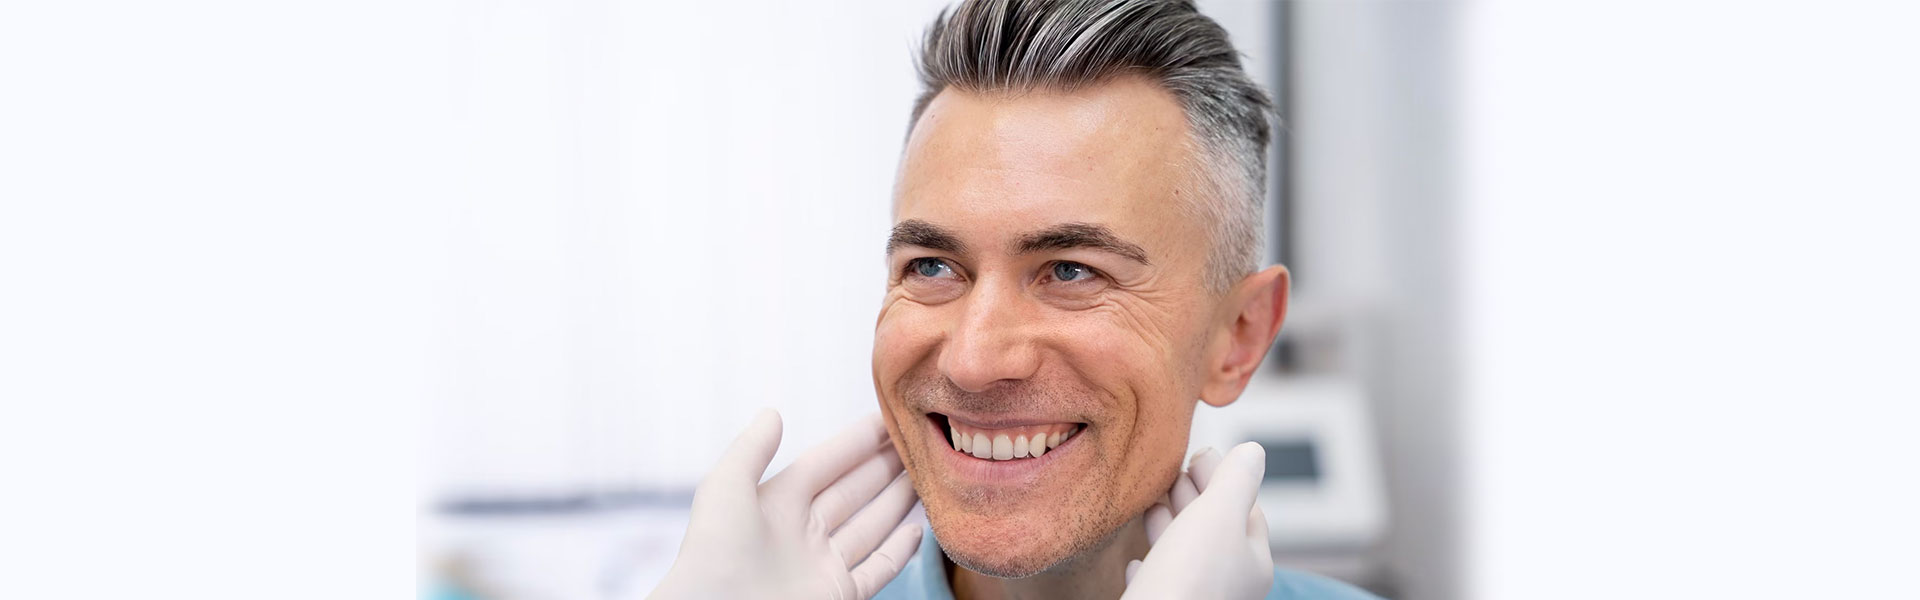 Dental Implants: Advantages and Considerations for Tooth Replacement